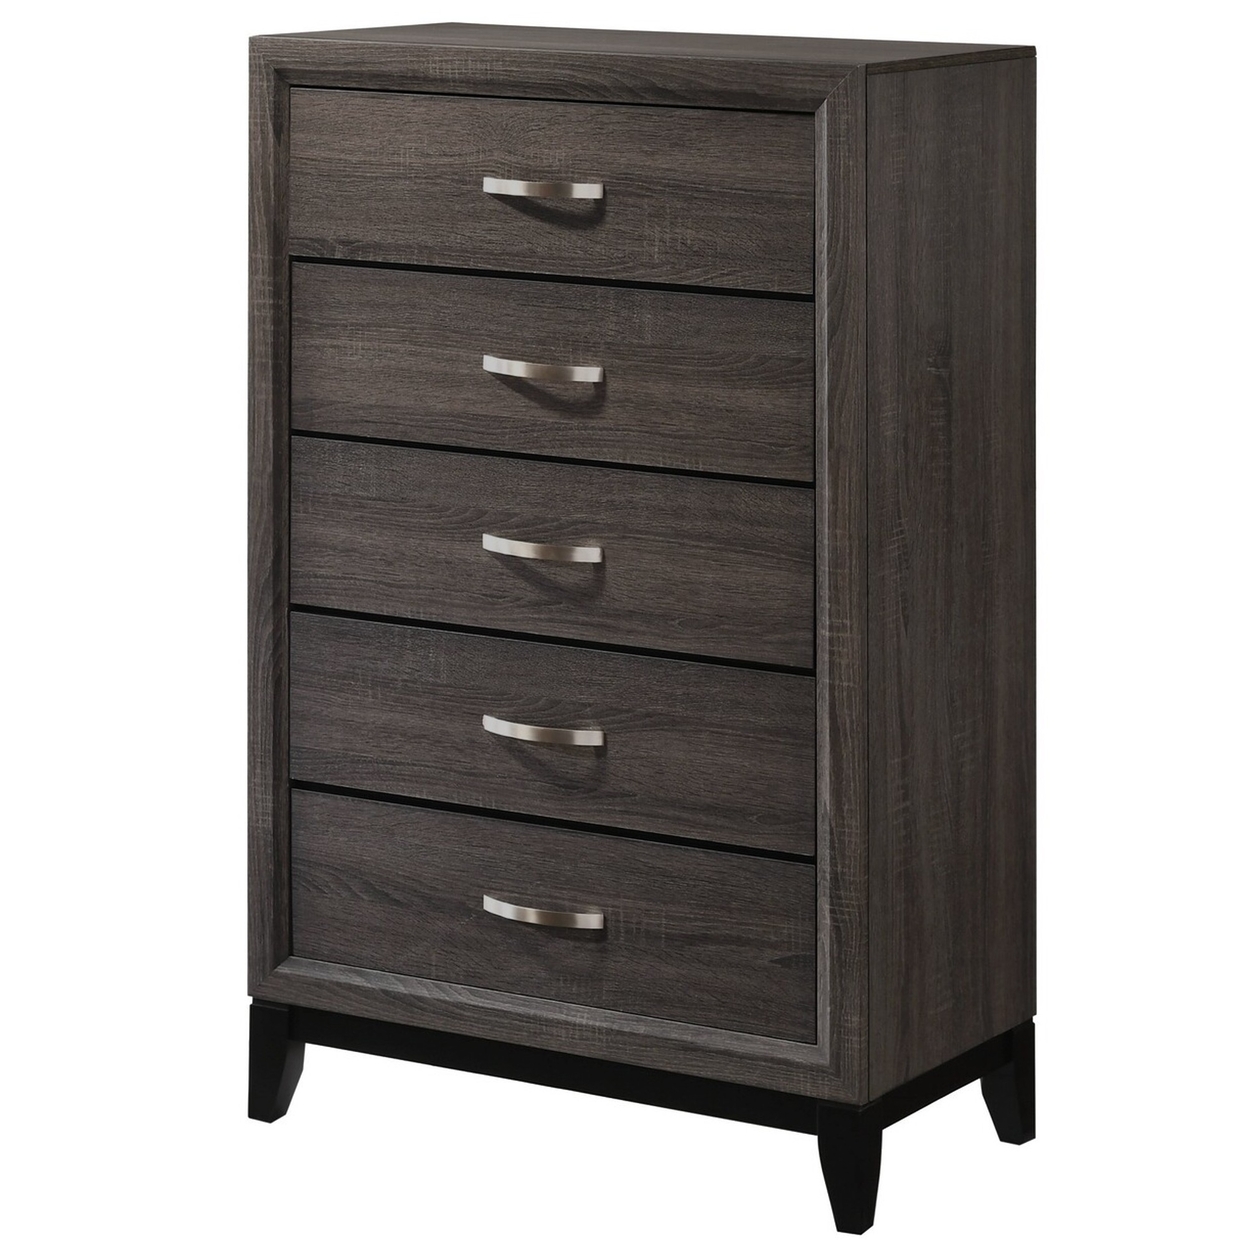 50 Inch Classic 5 Drawer Tall Dresser Chest With Metal Handles, Oak Gray